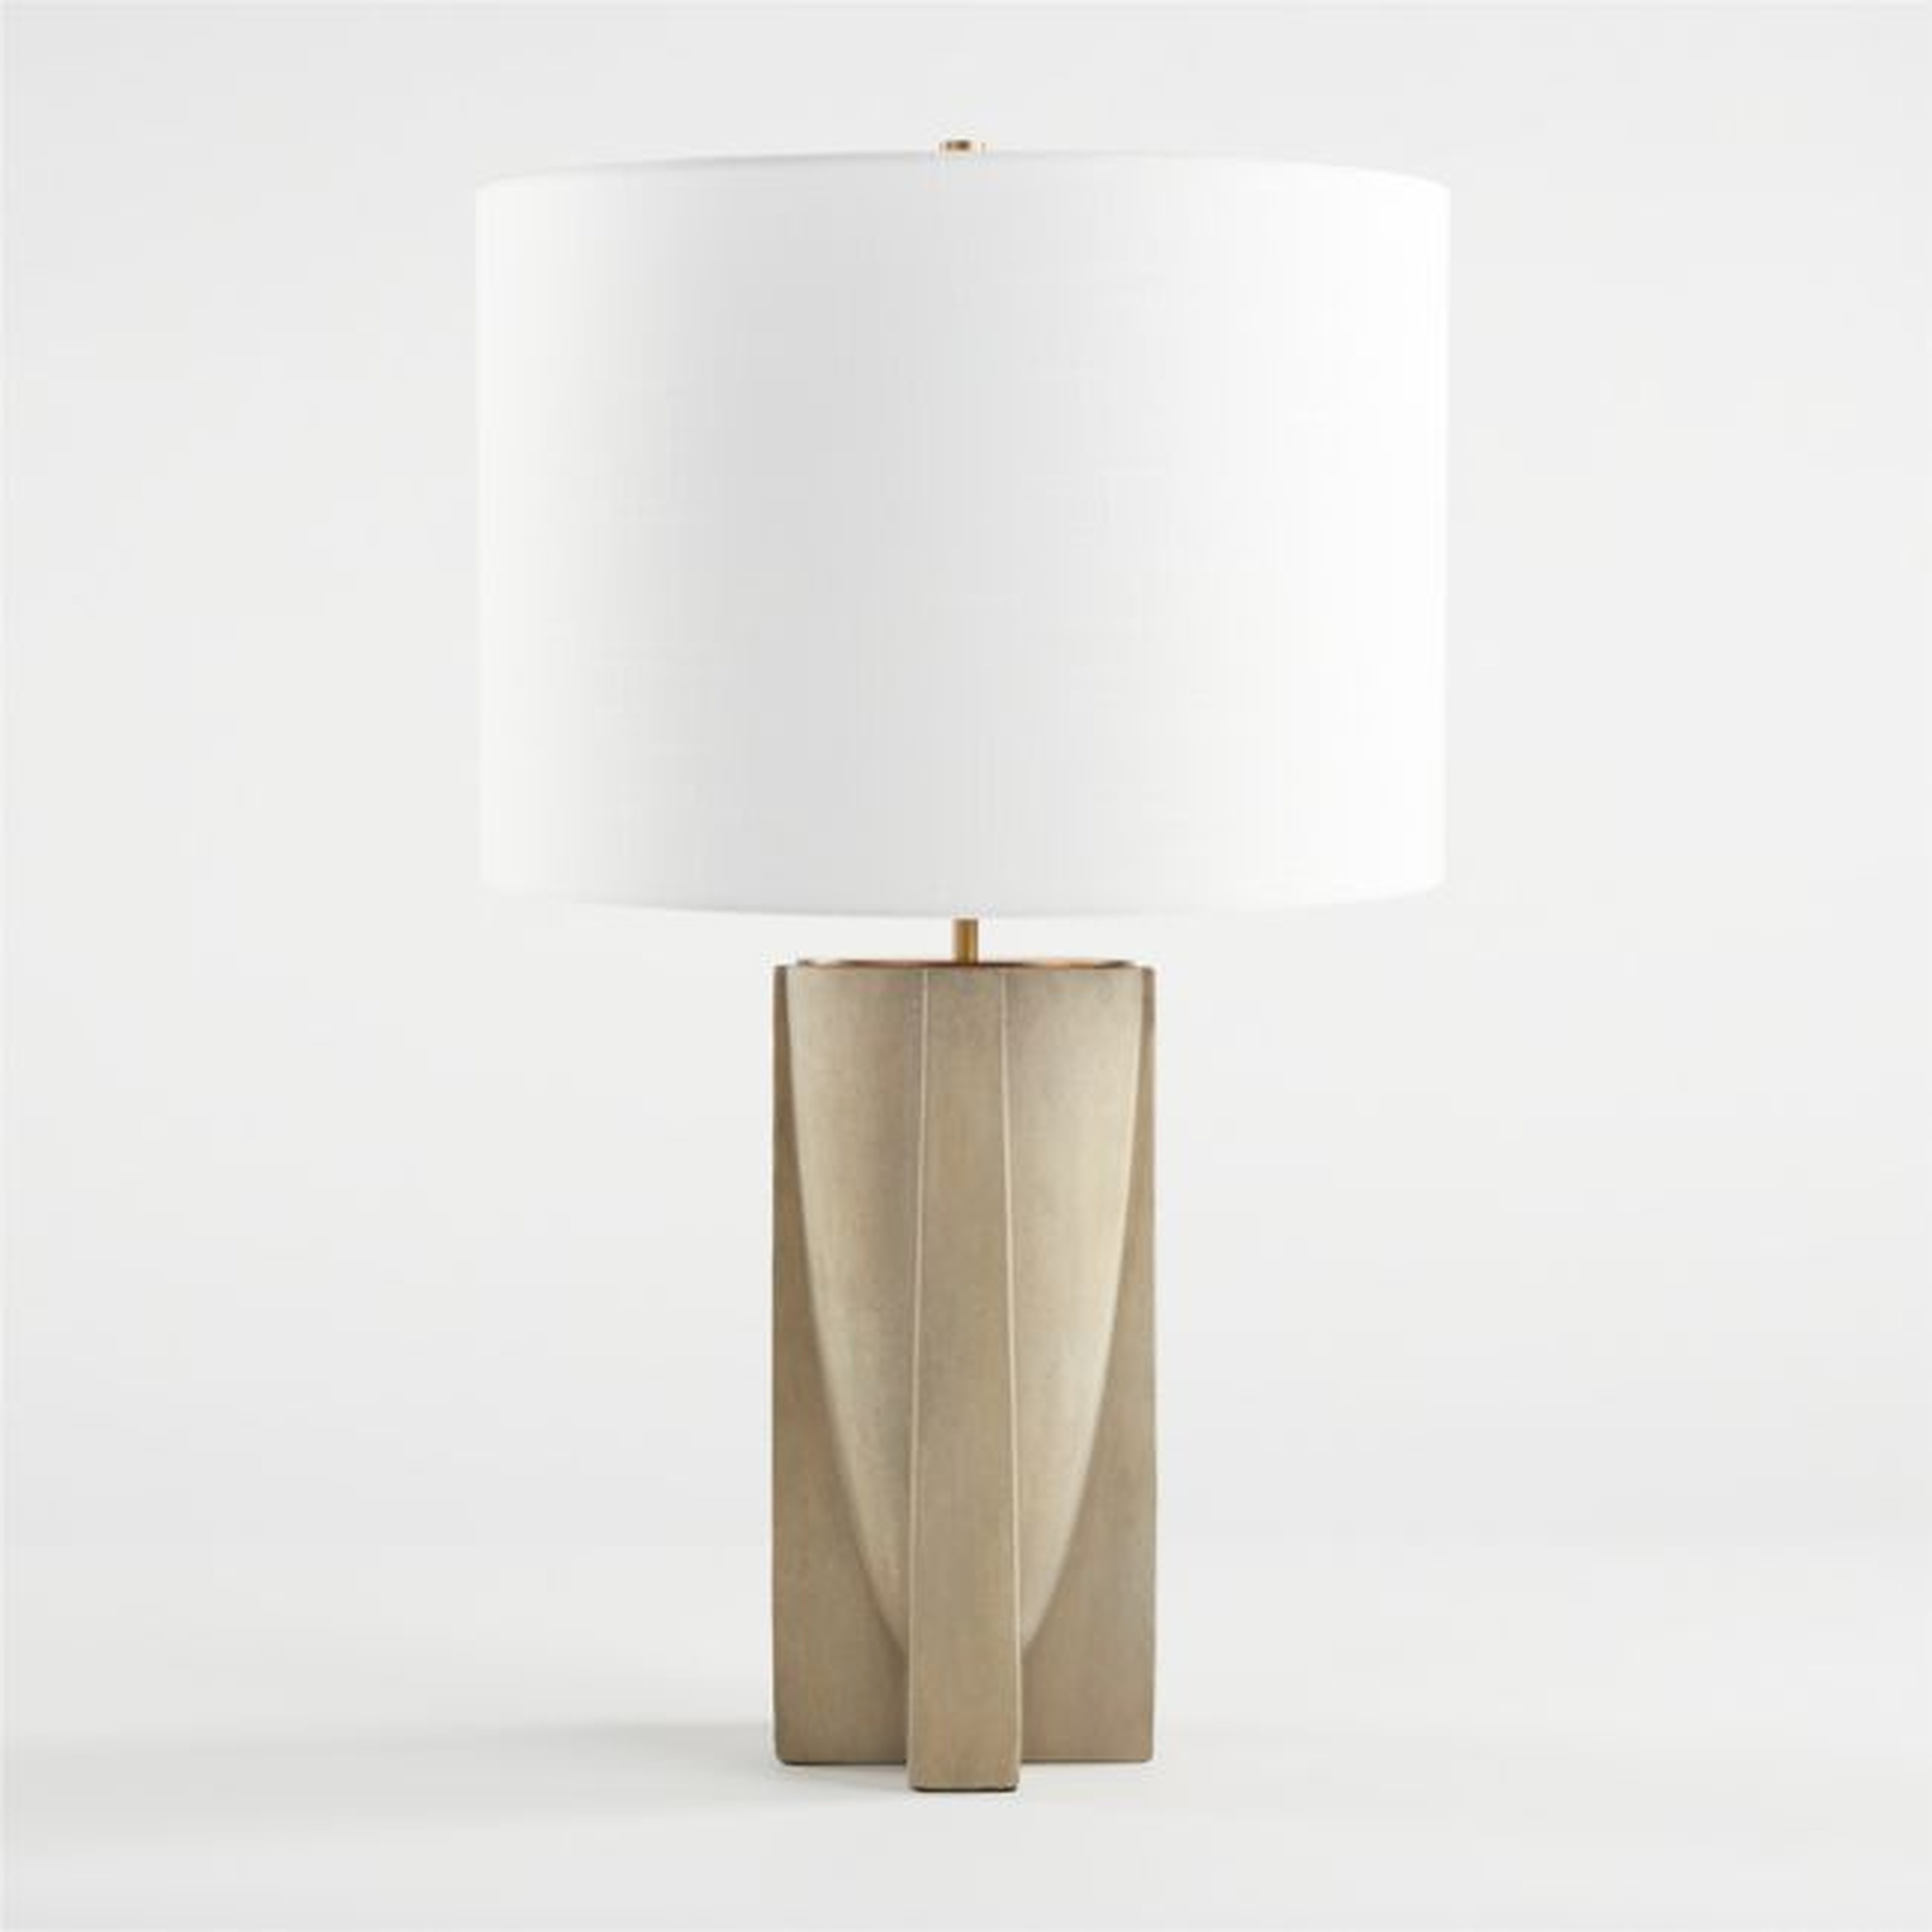 Lars Concrete Table Lamp - Crate and Barrel